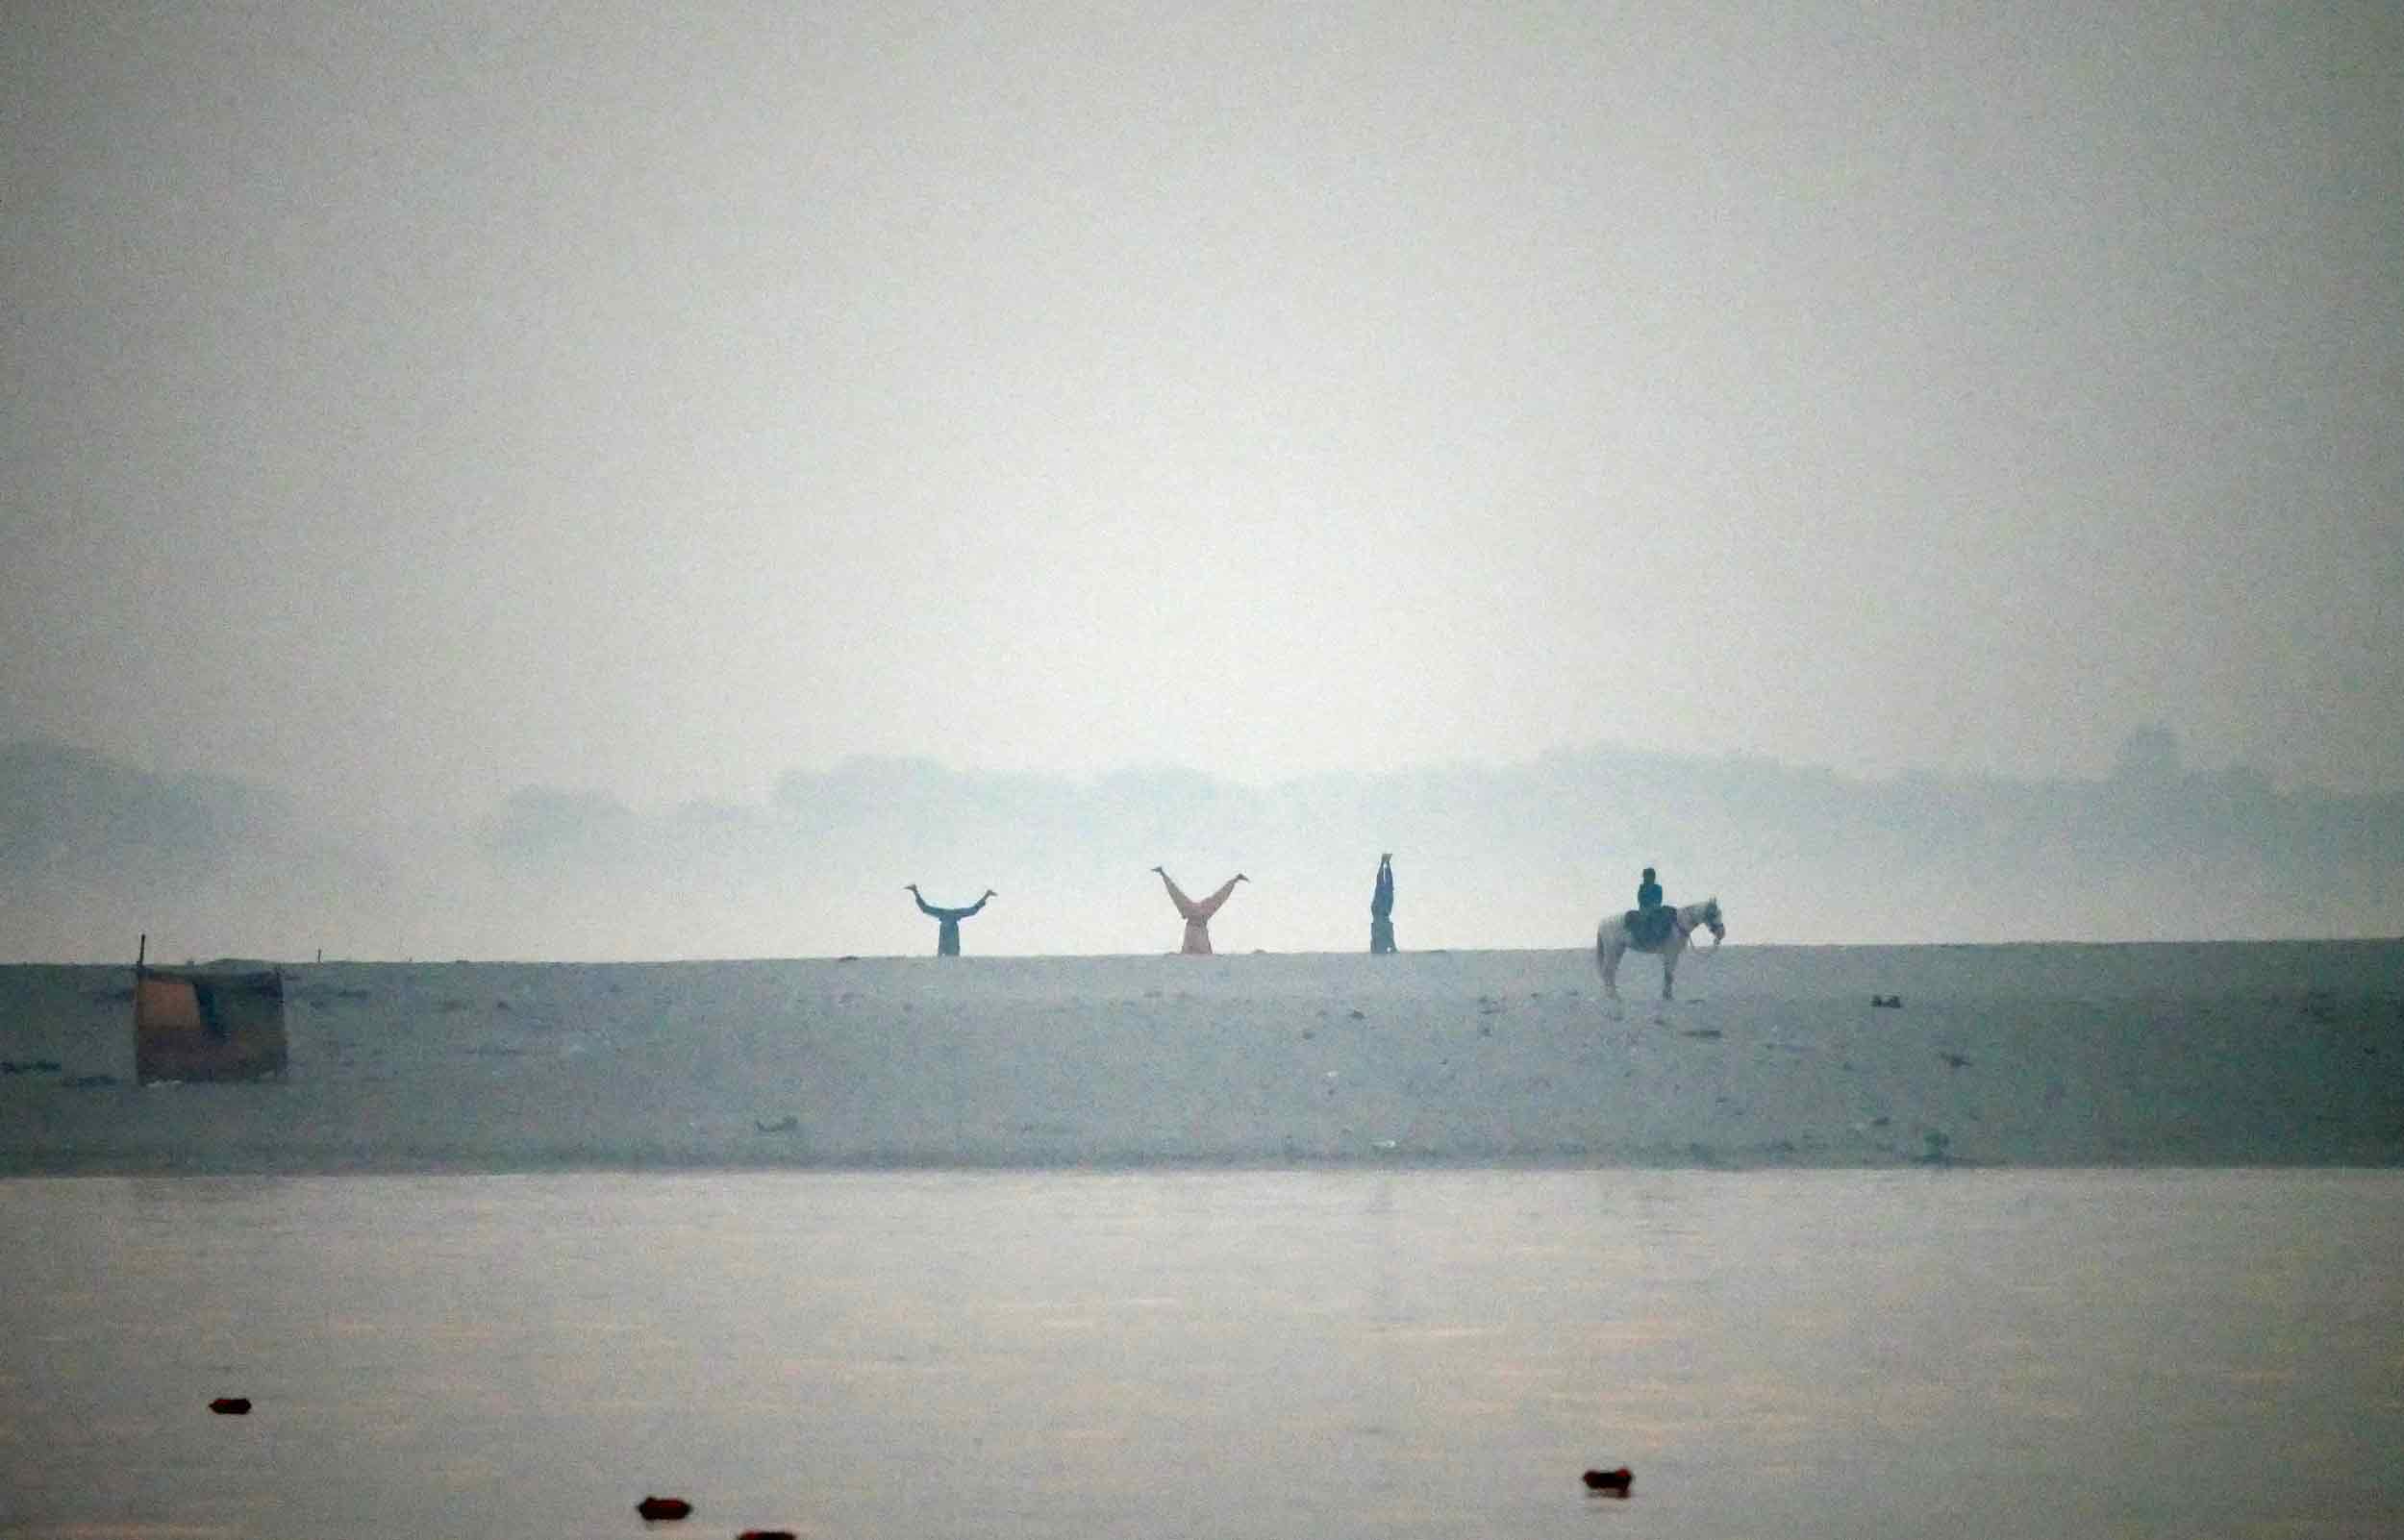  Yoga being practiced across the river on its sandy shore. 